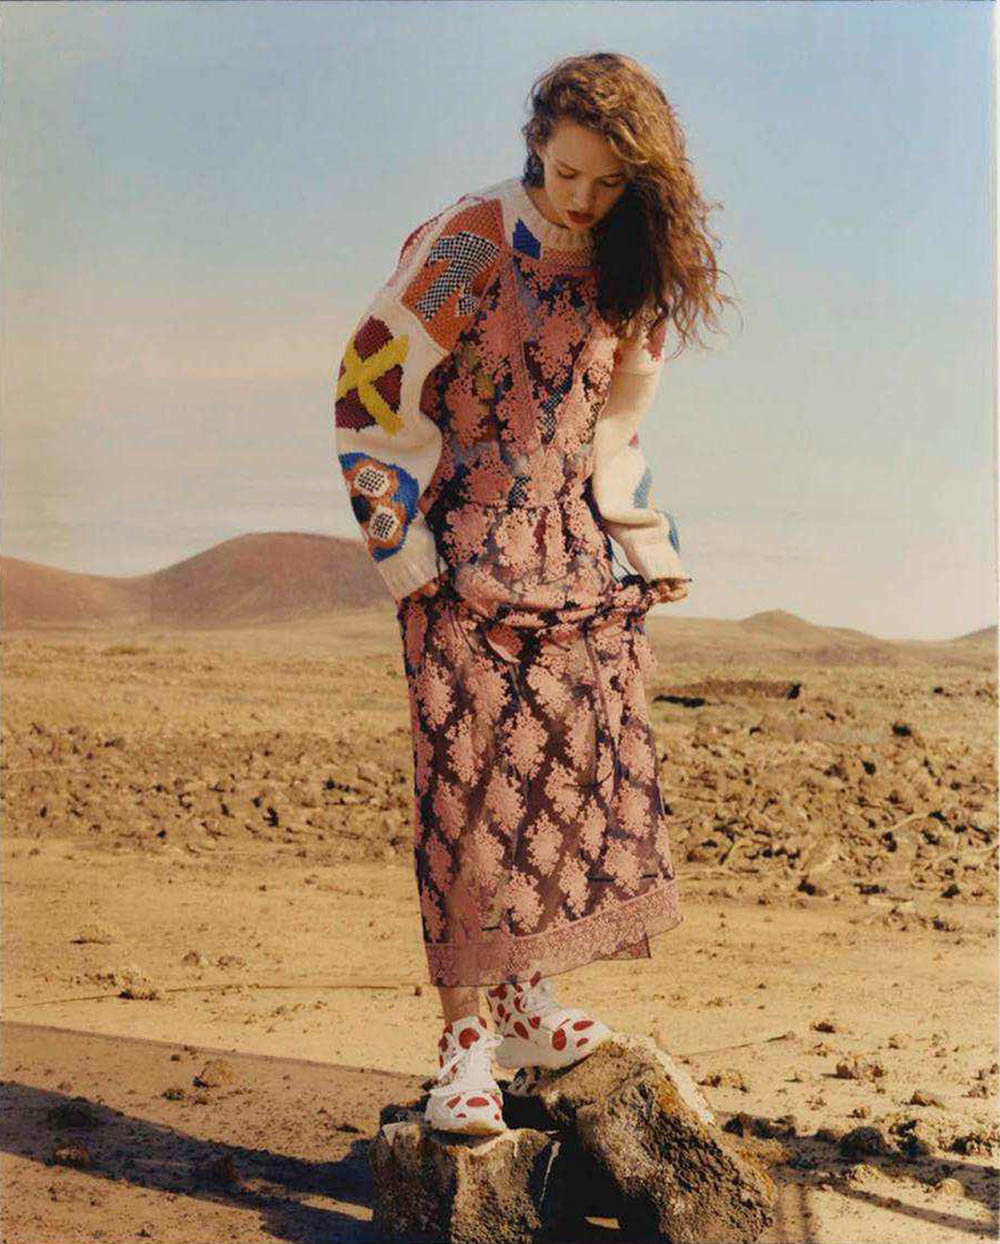 Adrienne Jüliger by Jens Ingvarsson for Vogue Spain August 2018